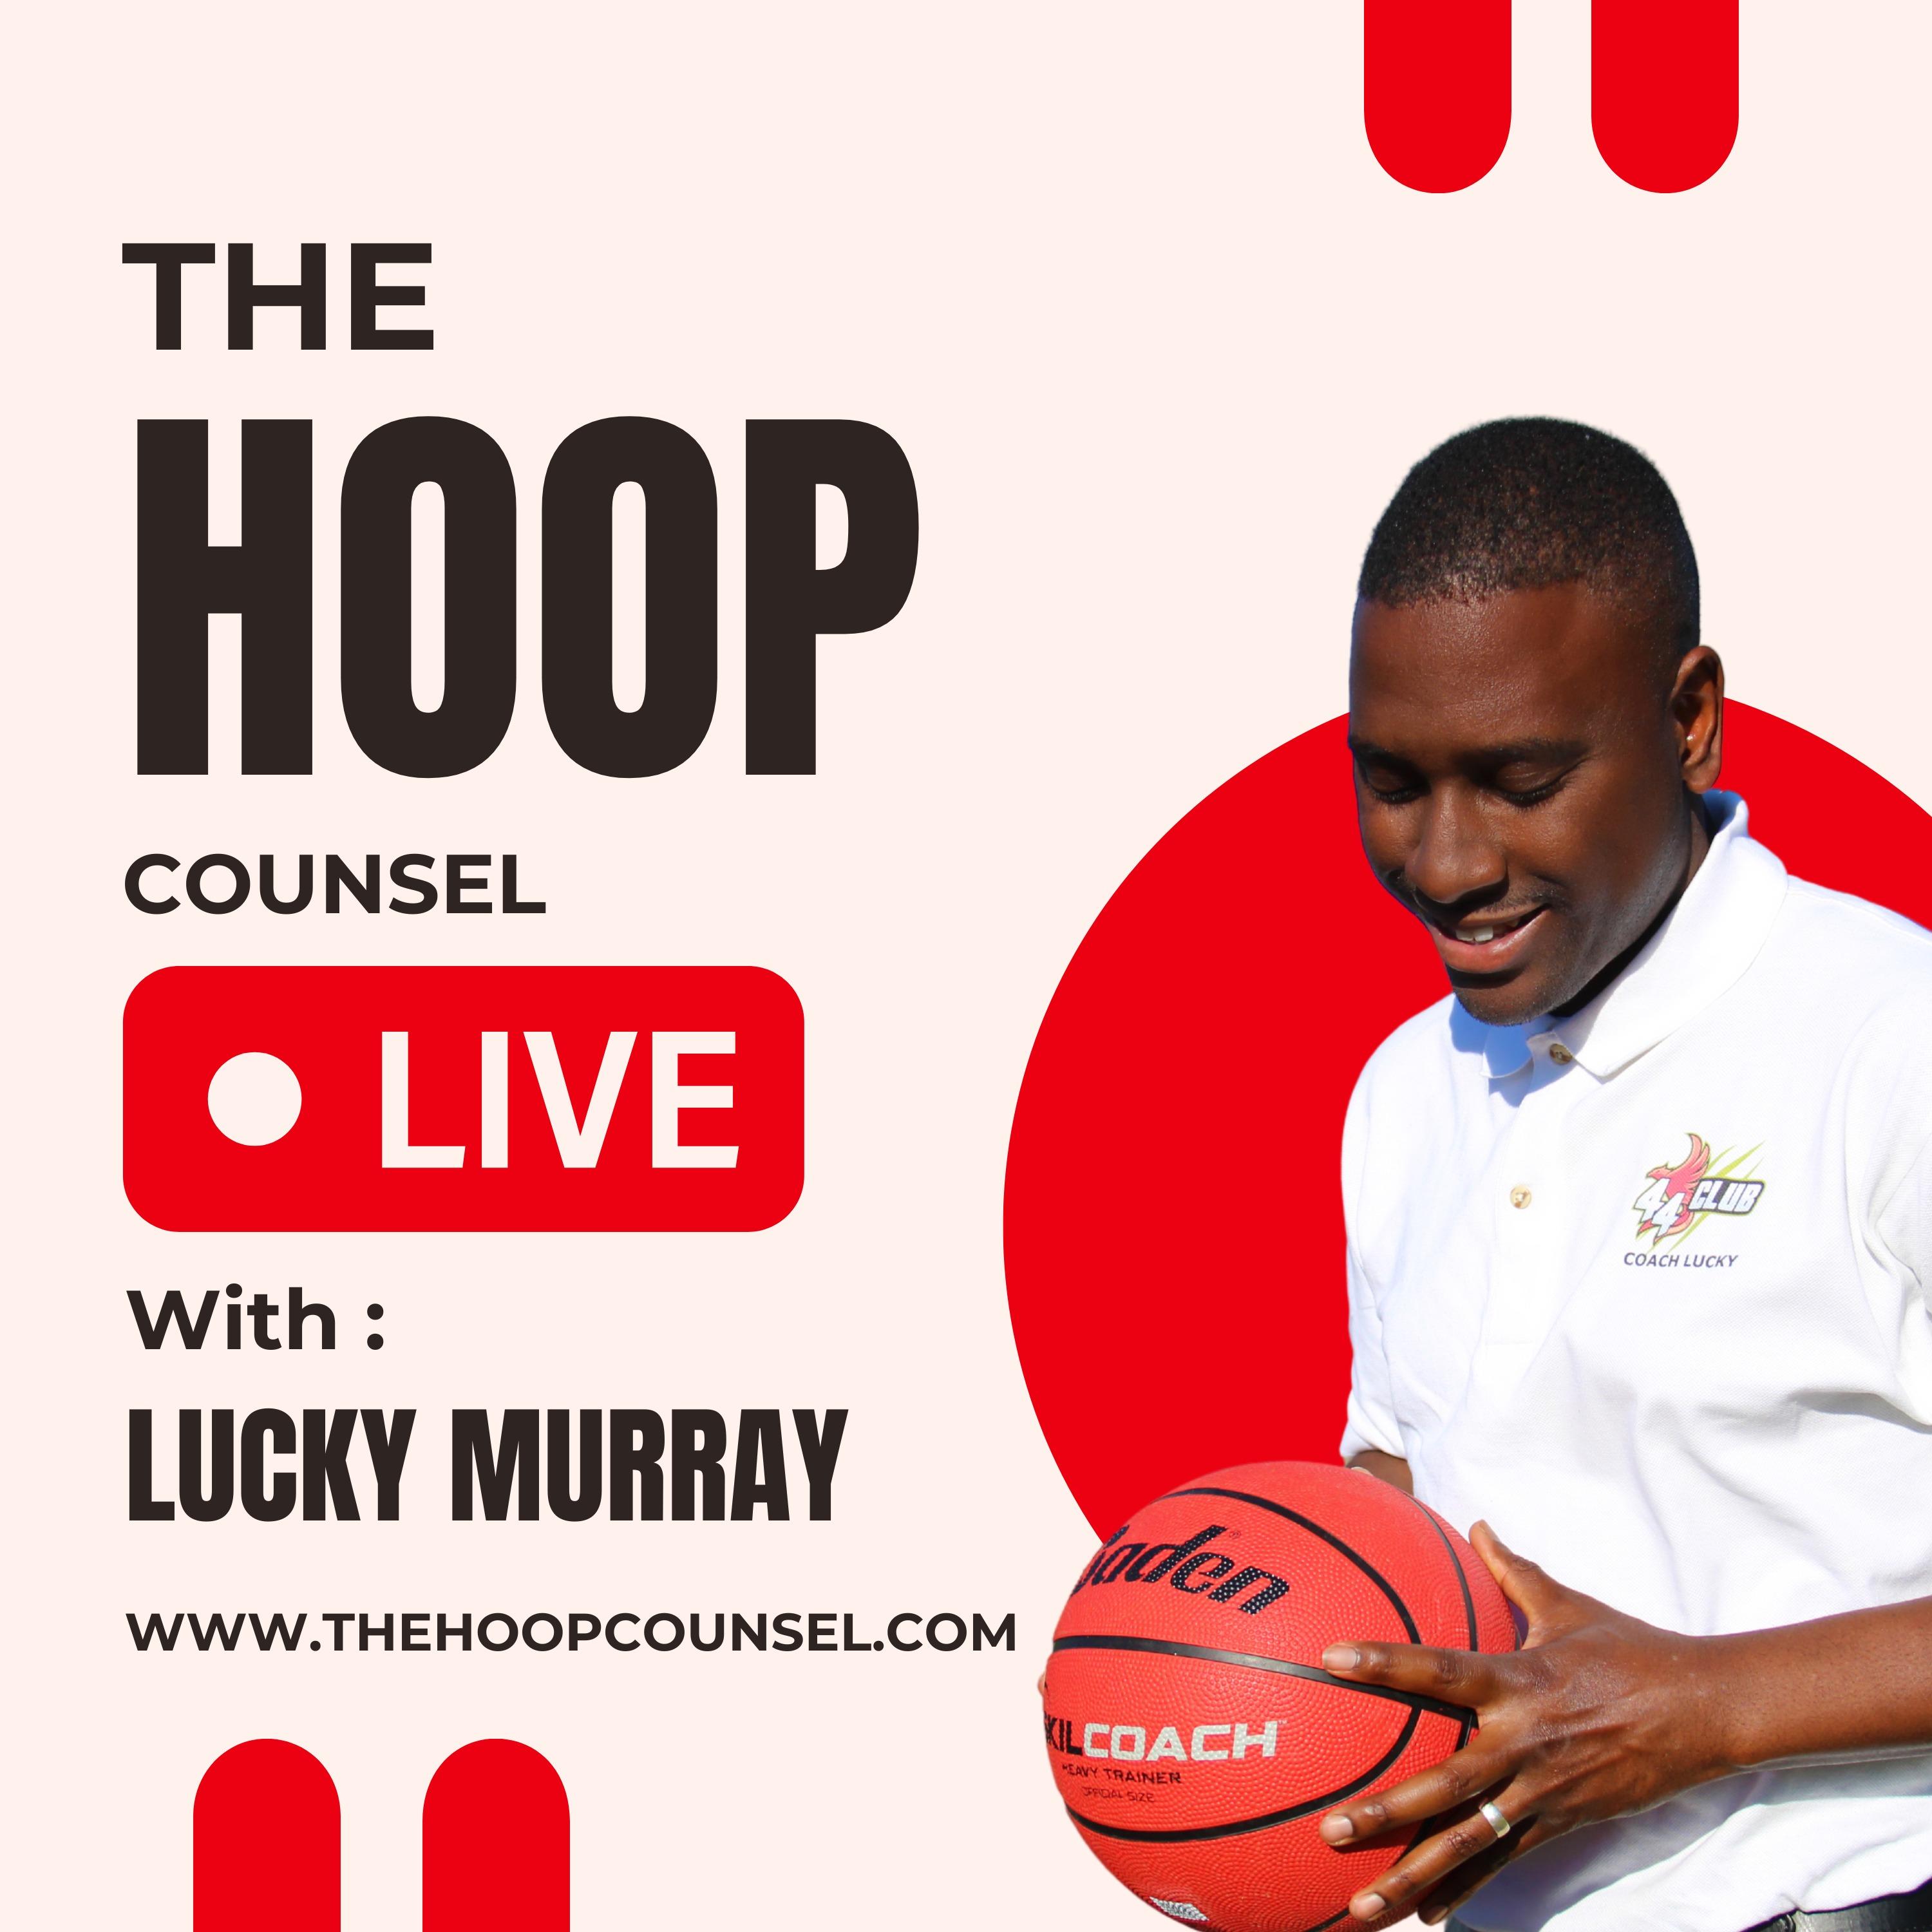 The Hoop Counsel